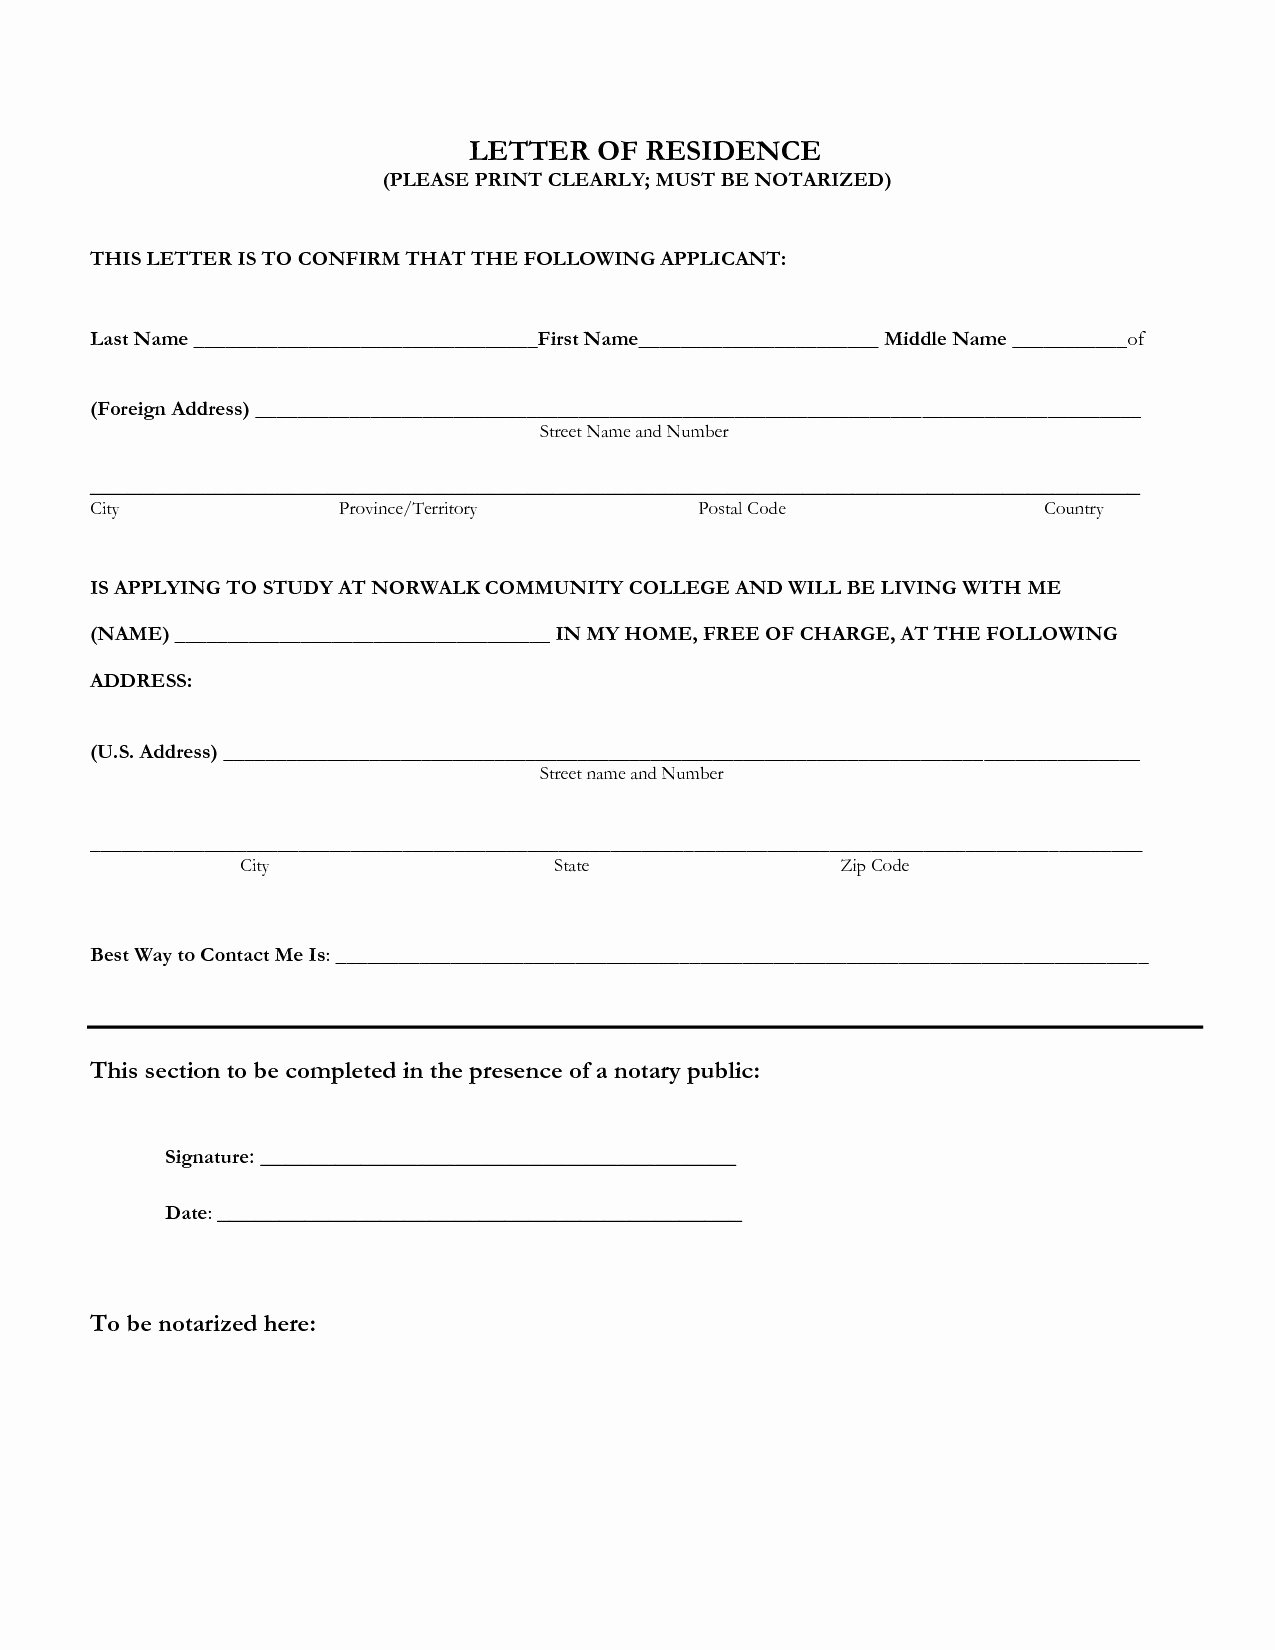 proof of residency letter notarized template